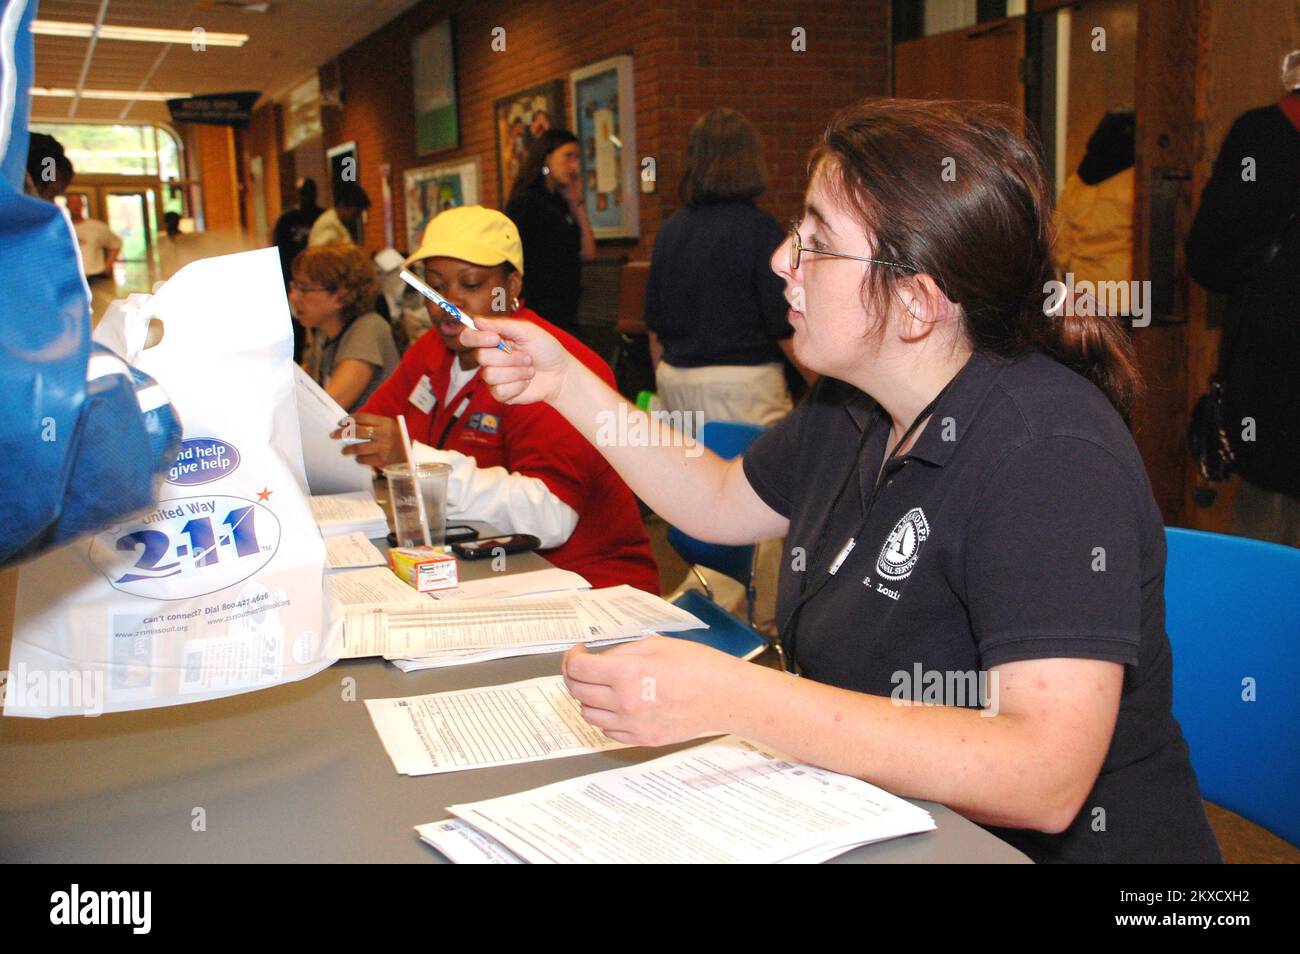 Tornado - Ferguson, Mo. , May 14, 2011   Jessica Callahan, a member of the coordinated service team of Americorps, assists tornado survivors with their check-in at the Multi-Agency Resource Center (MARC) held Saturday, May 14, 2011. Nineteen area agencies participated in the roundup held at the Florissant Valley Community College. Over 1500 survivors participated in the event. The Greater St. Louis area was struck by tornadoes and storms on April 22. Jace Anderson/FEMA.. Photographs Relating to Disasters and Emergency Management Programs, Activities, and Officials Stock Photo